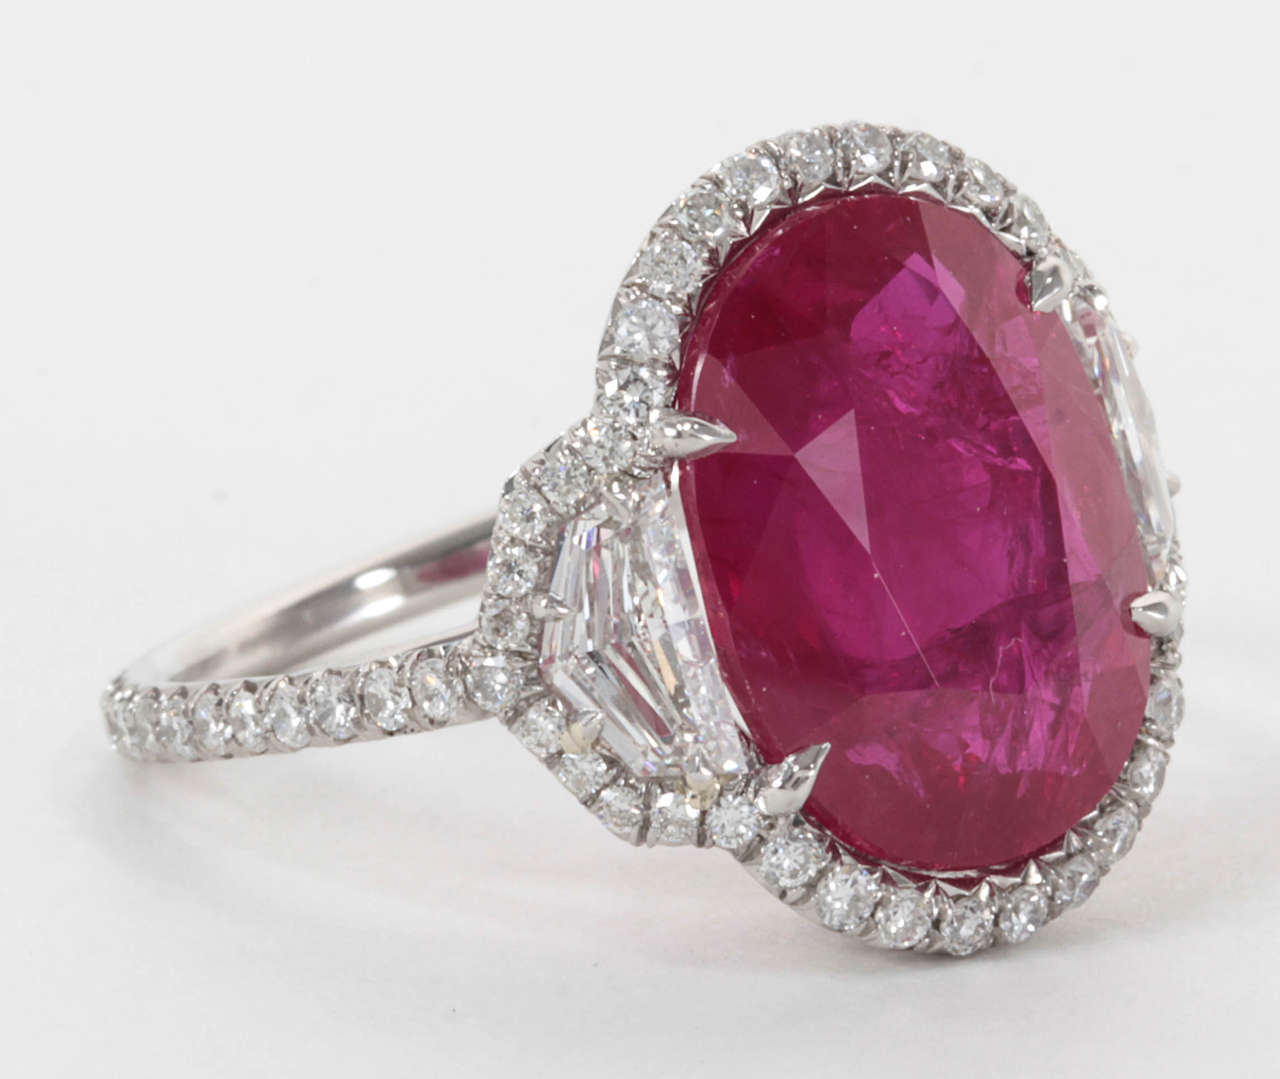 Beautiful oval 8.06 carat ruby set in a handmade micro pave diamond mounting with special cut side diamonds.

1.56 carats of diamonds set in platinum.

Pictures do not do this ring justice, please contact us for more information. 